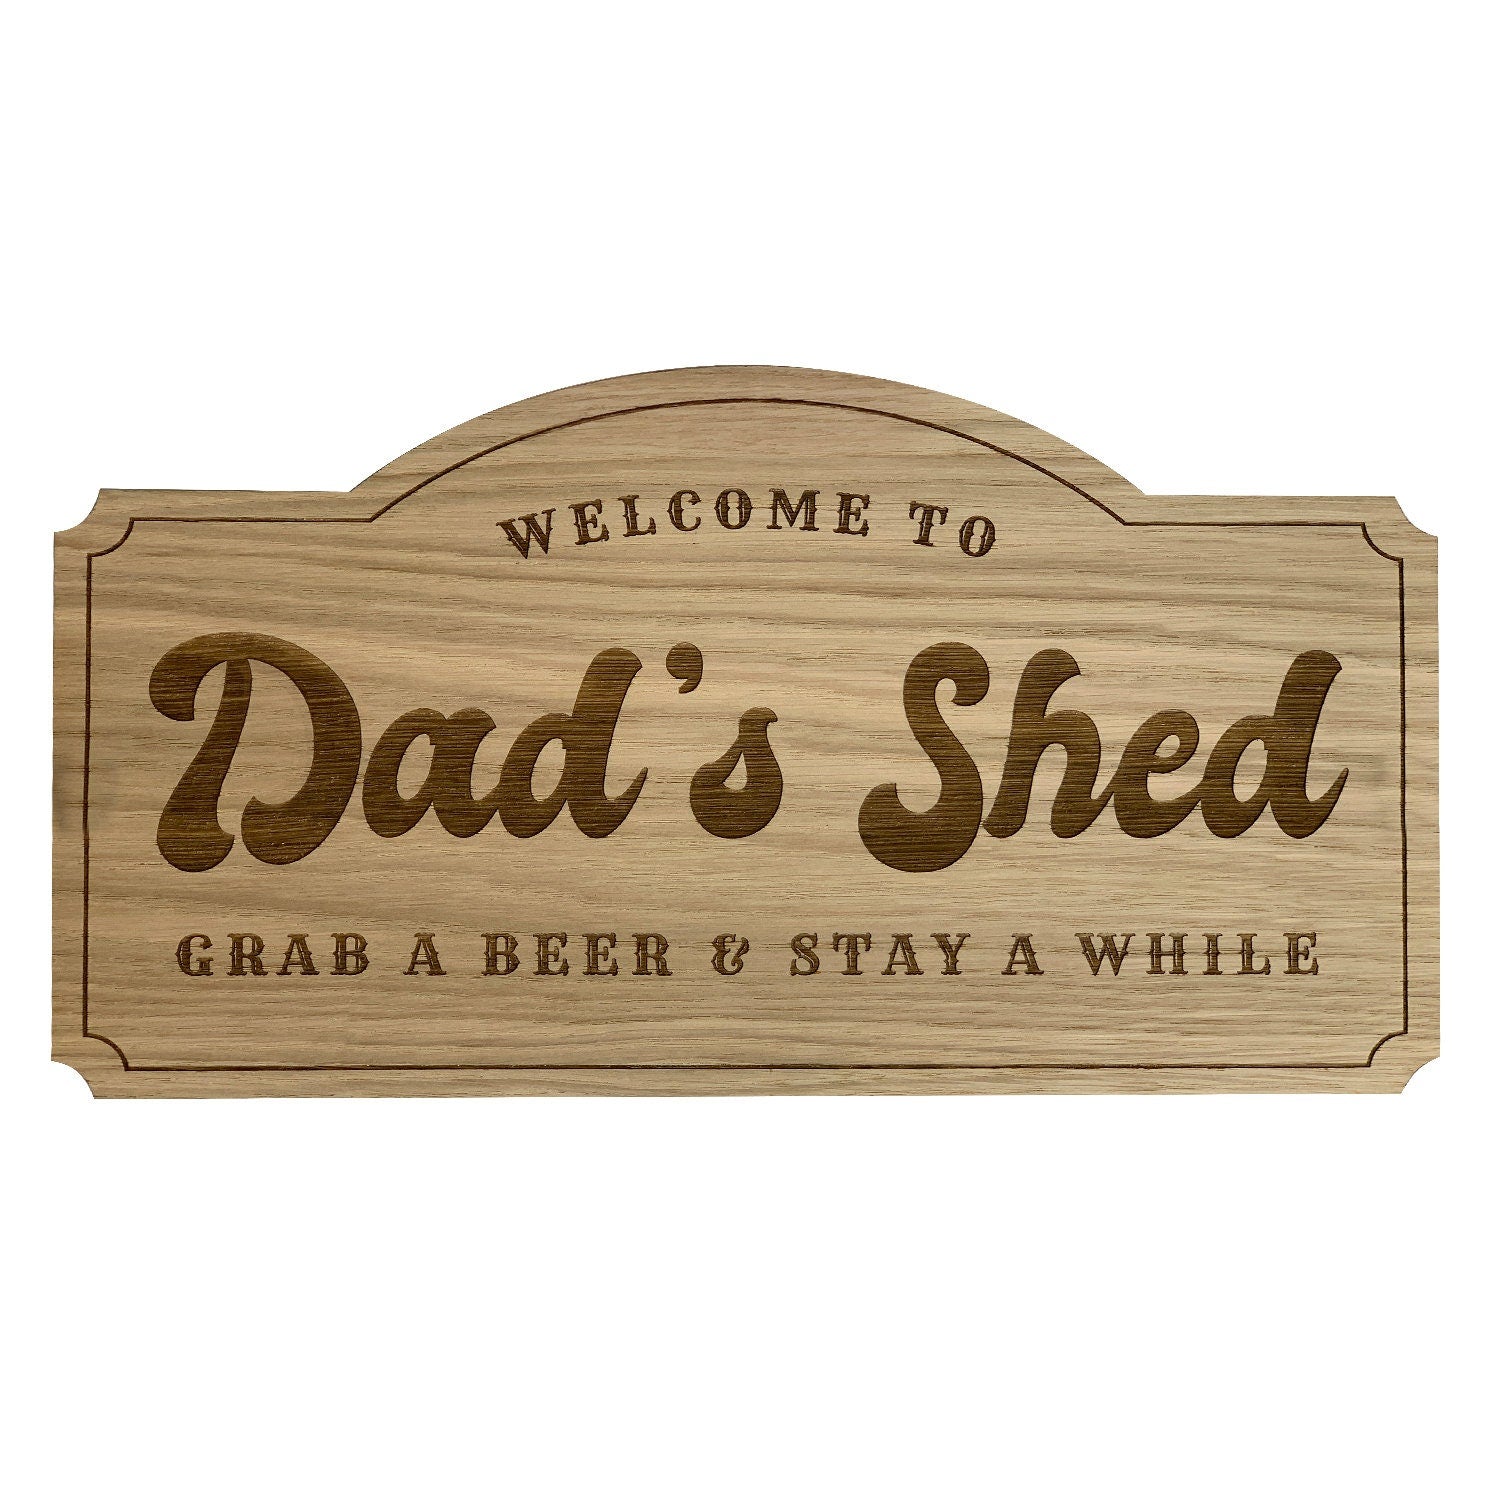 Dad's Shed Rustic Wooden Shed Cabin Man Cave Sign